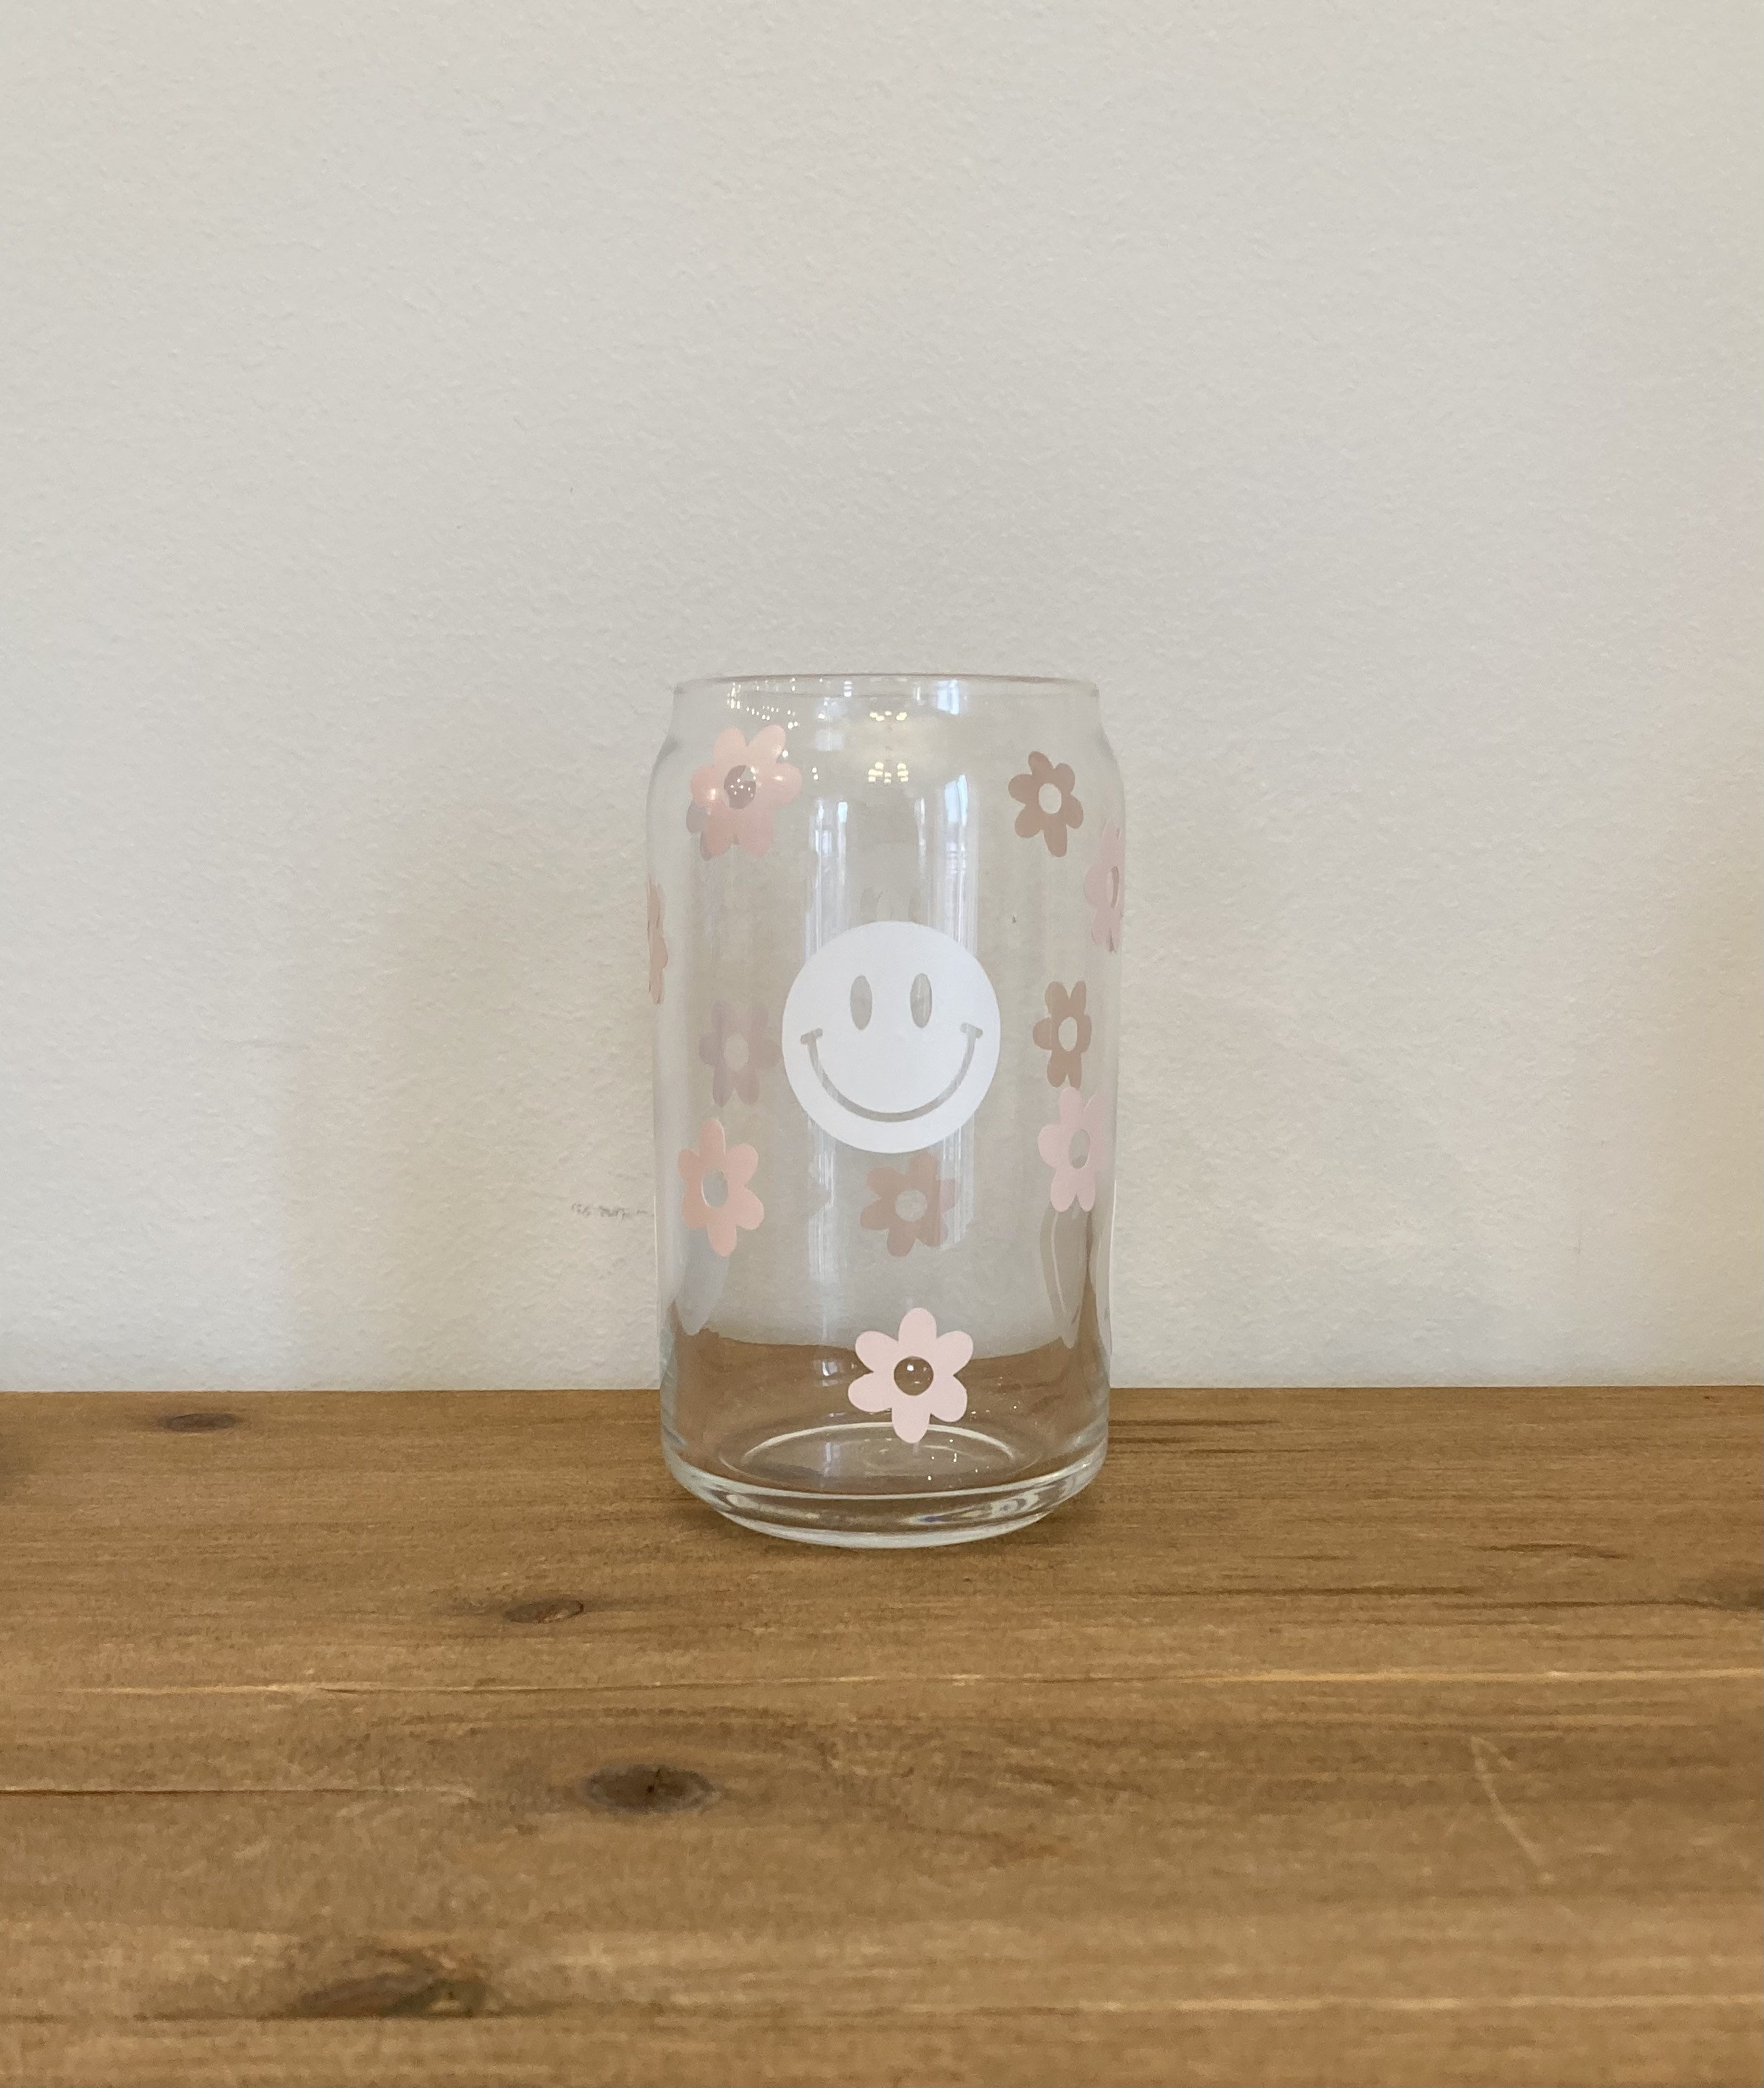 Libbey Iced Coffee Cup, Coffee Cup, Coffee Glass, Beer Glass Can, Coff –  littlepaperies